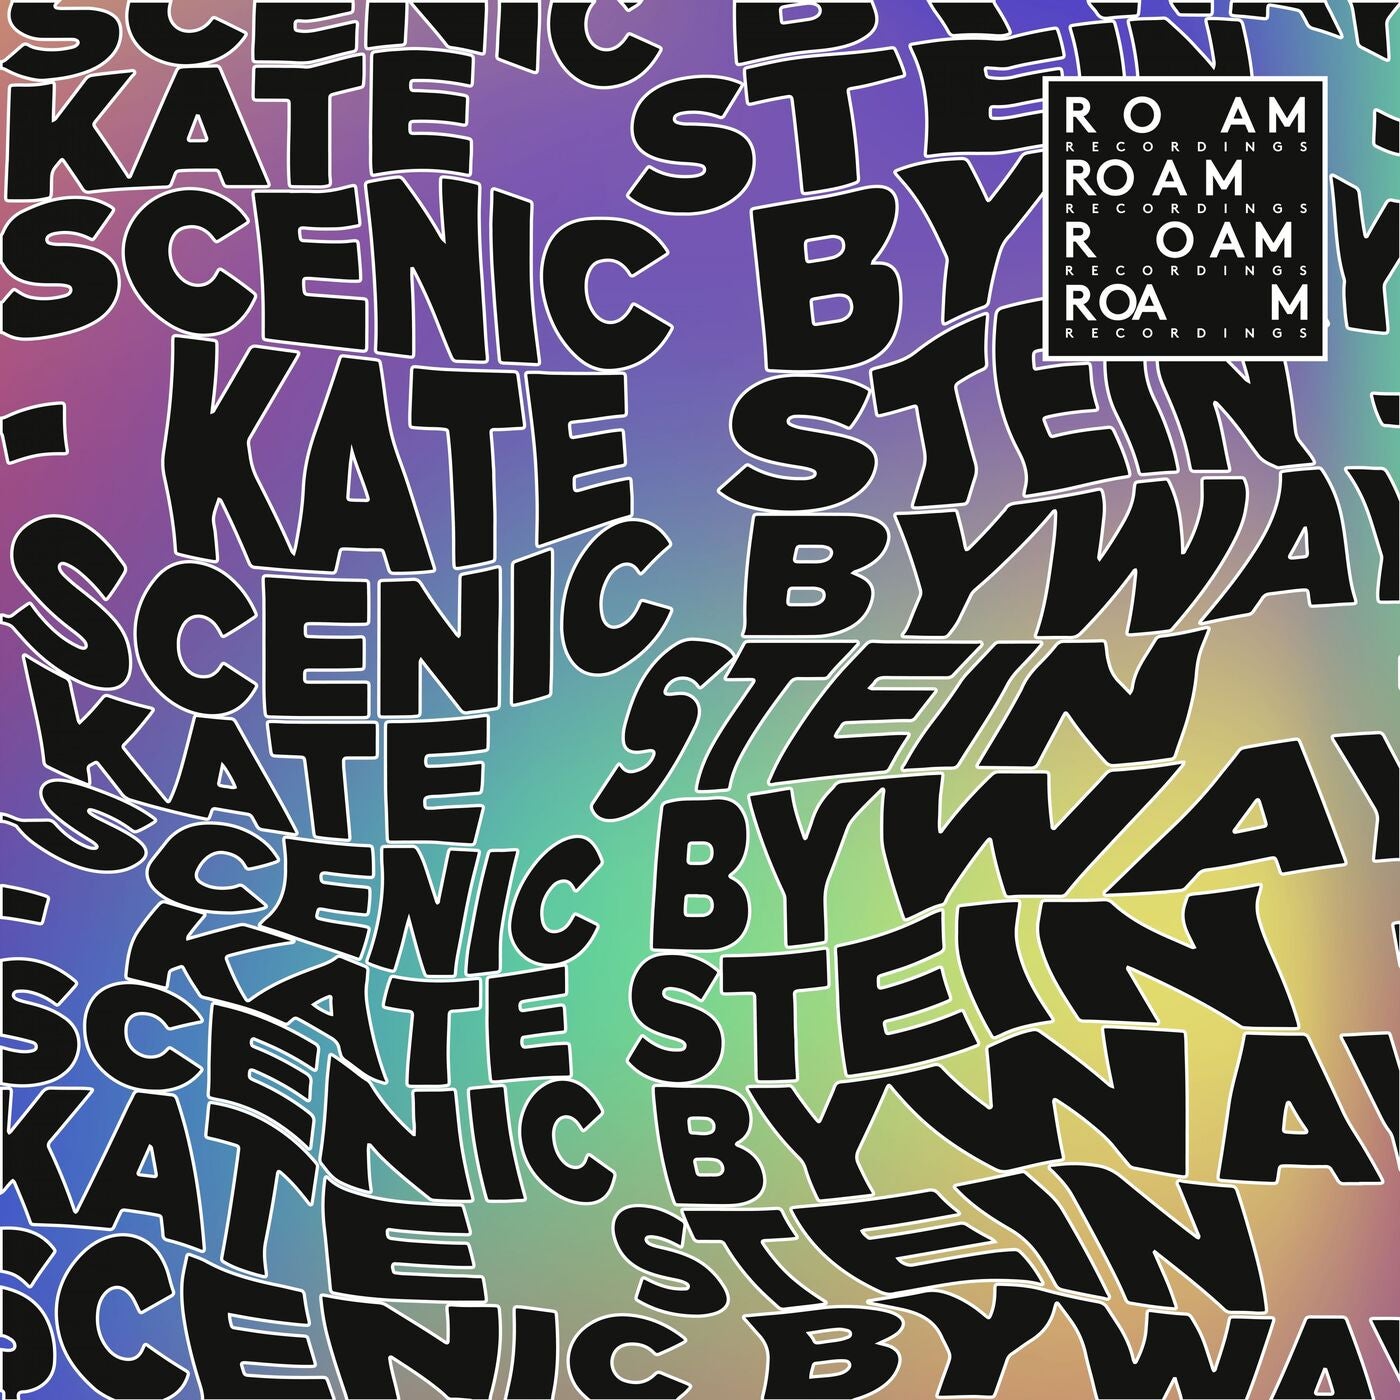 Kate Stein – Scenic Byway [ROM094]